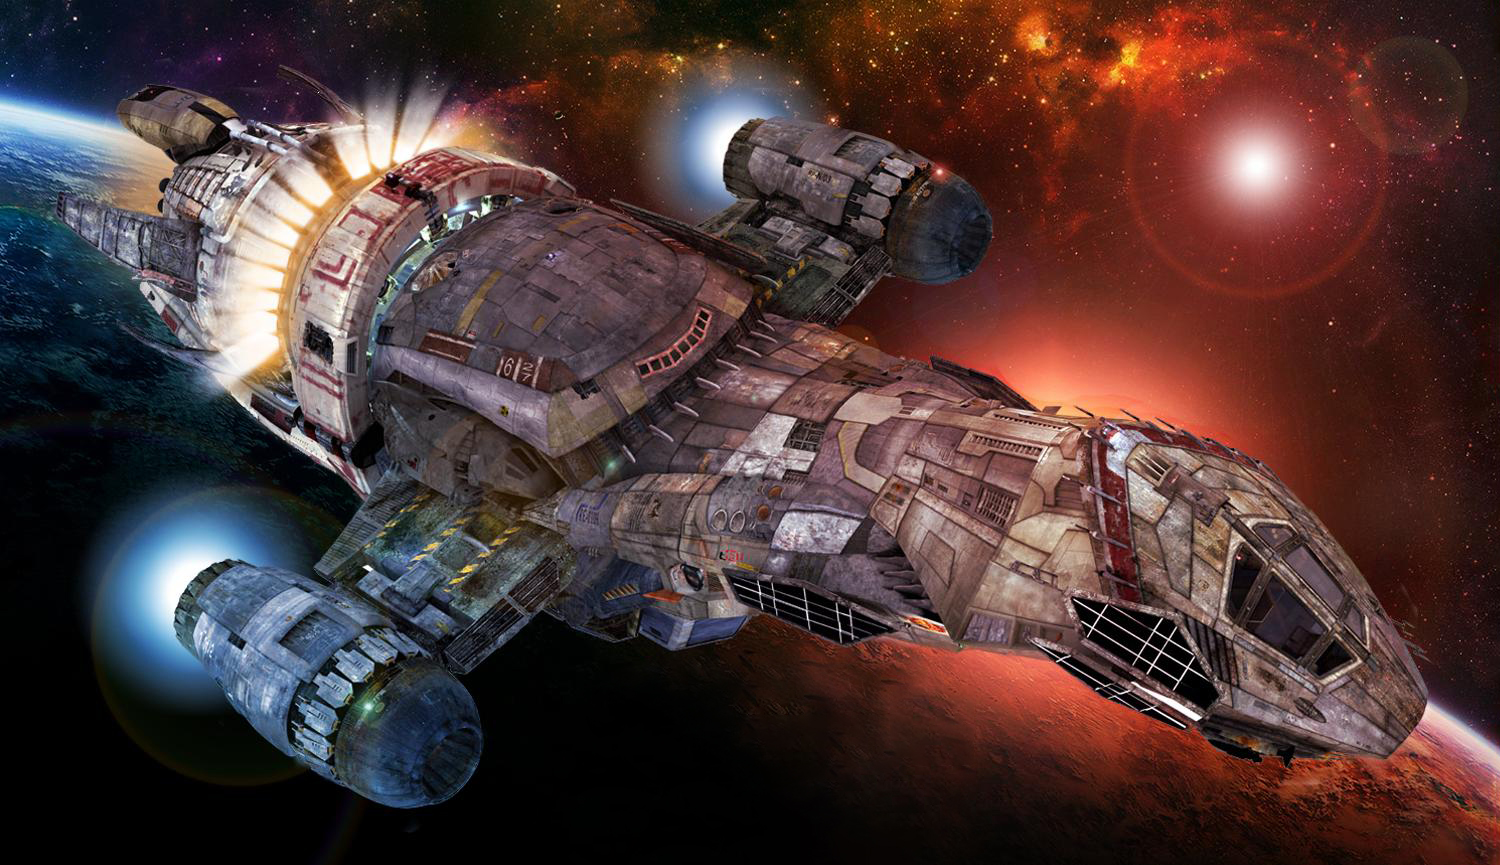 An artistic picture of the spaceship Serenity from Firefly